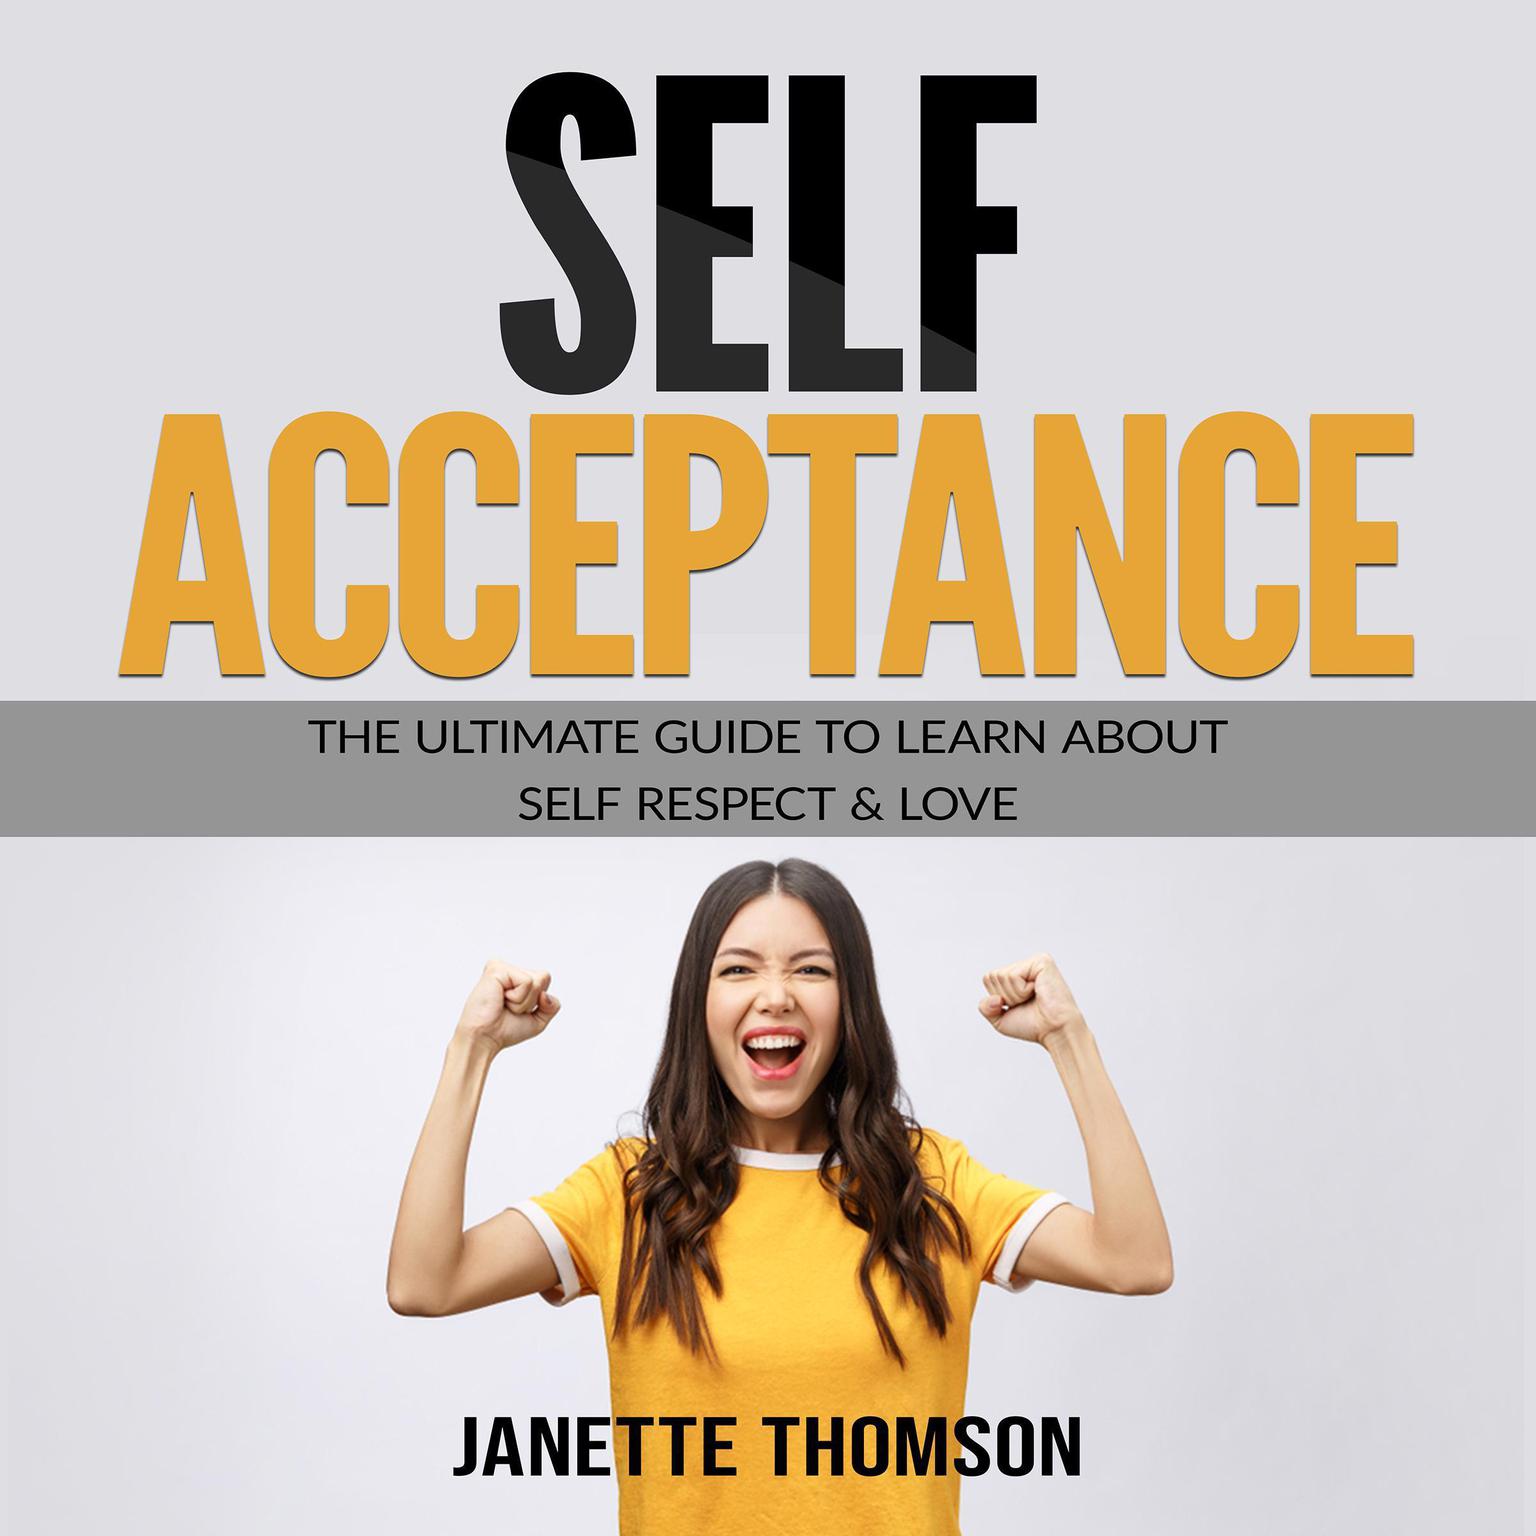 Self-Acceptance: The Ultimate Guide to Learn About Self Respect & Love Audiobook, by Janette Thomson